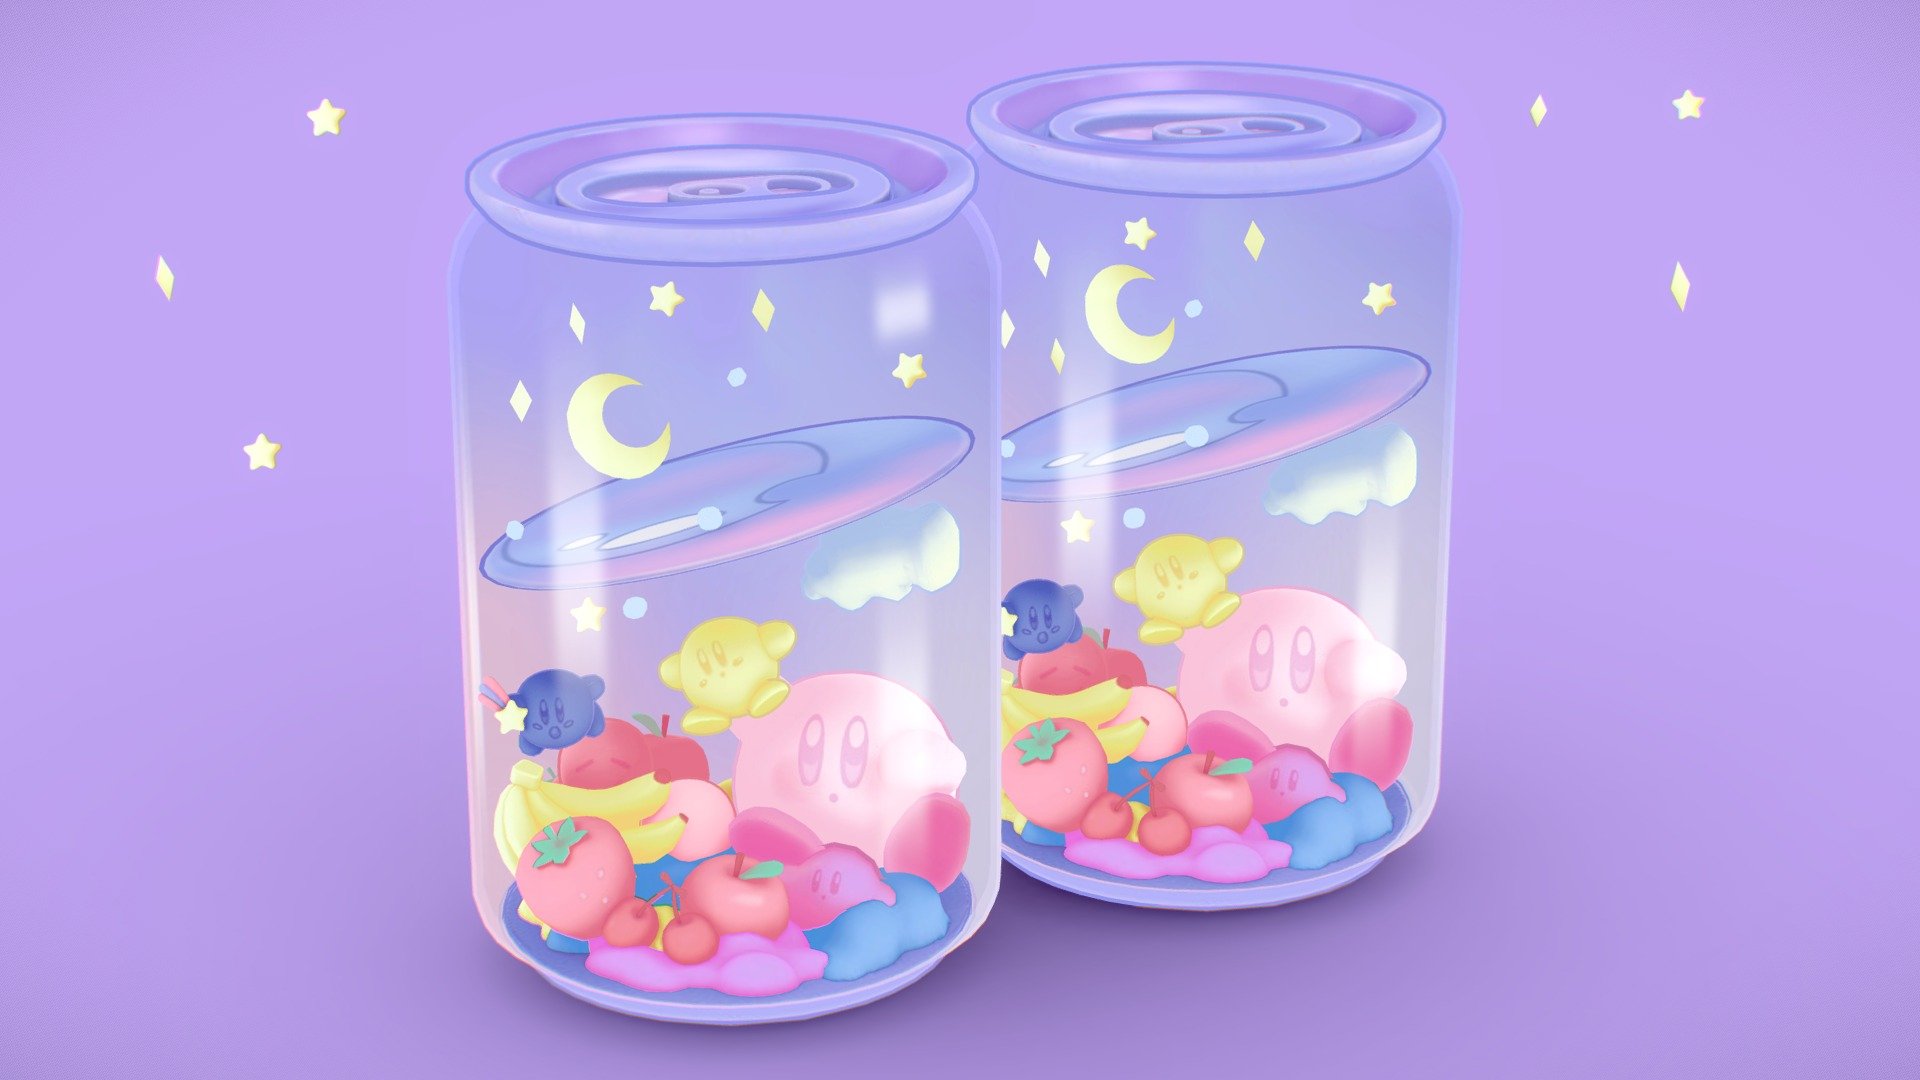 Hey! This is my first post on sketchfab :D Introducing - the cutest soda can with a kirby inside! 
It was so much fun creating this! It was a challenge working with only the base color texture, but it gives off the perfect vibe! ♡

I plan on posting more cool props just like this one, so make sure to follow if you like it♡

Thanks for viewing ♡ - Kirby's soda can ♡ - 3D model by Moon (@Moon_solstice) 3d model